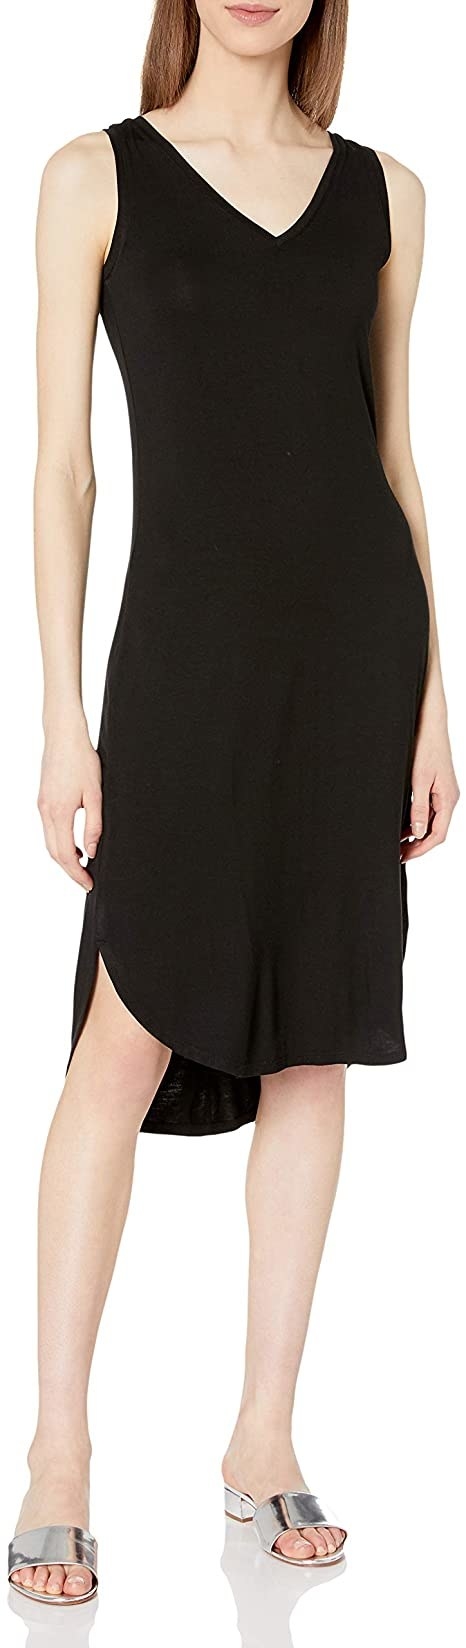 model wearing sleeveless V-neck black dress with curved hem that hits at the knee